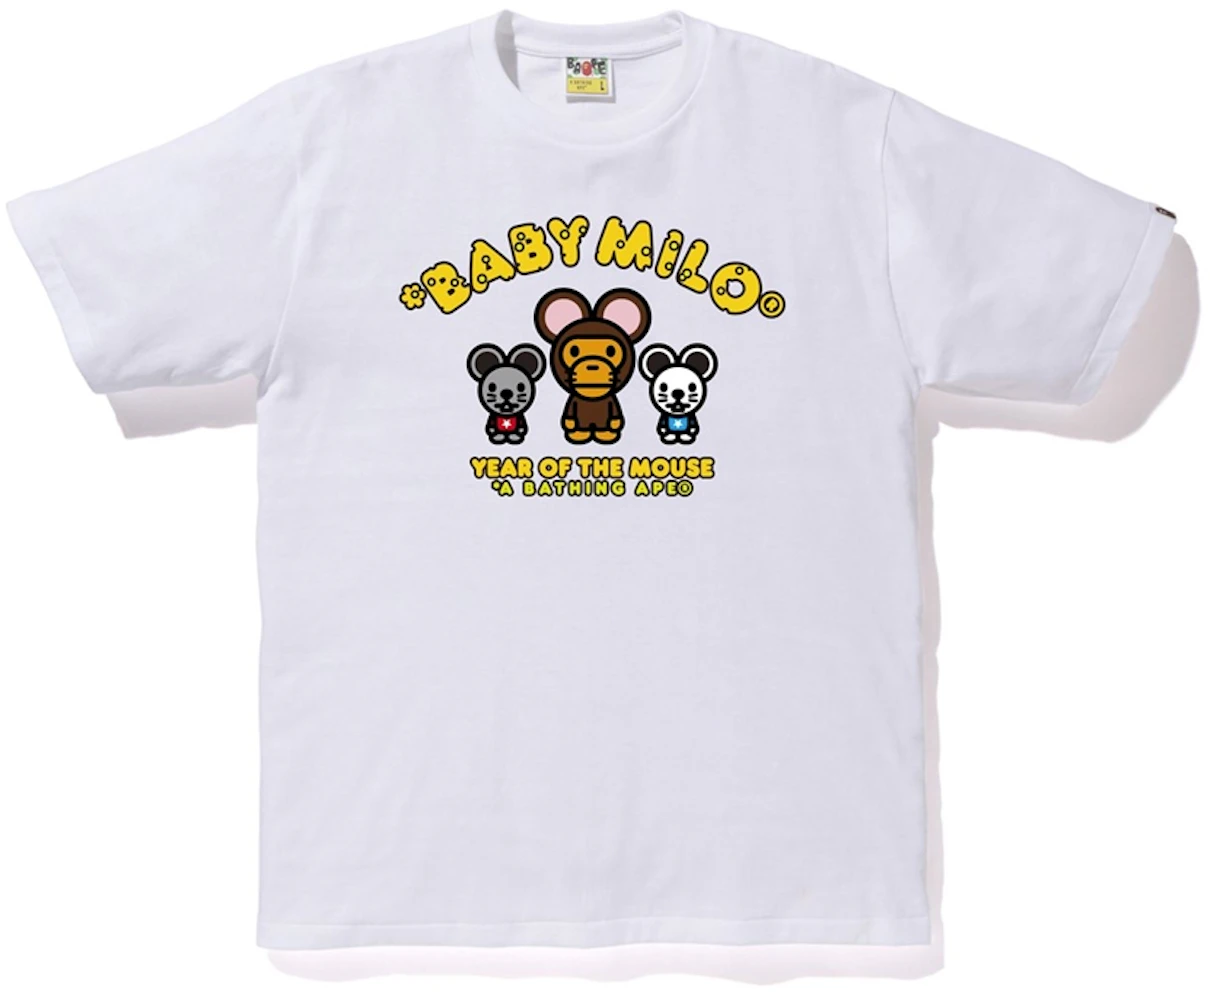 BAPE Year of The Mouse Baby Milo Tee White Men's - SS20 - GB